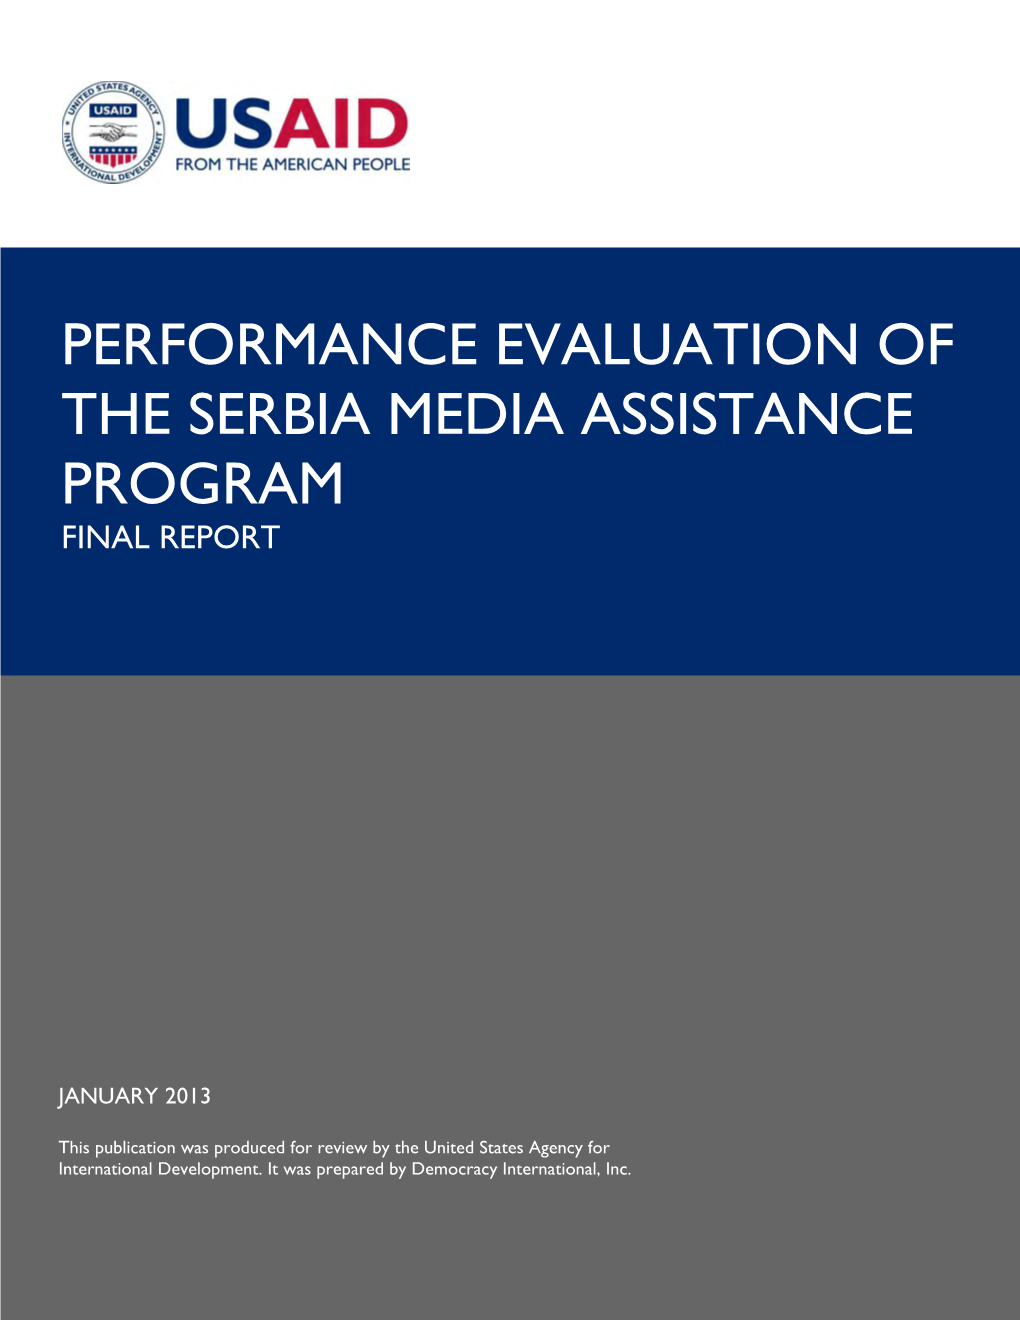 Performance Evaluation of the Serbia Media Assistance Program